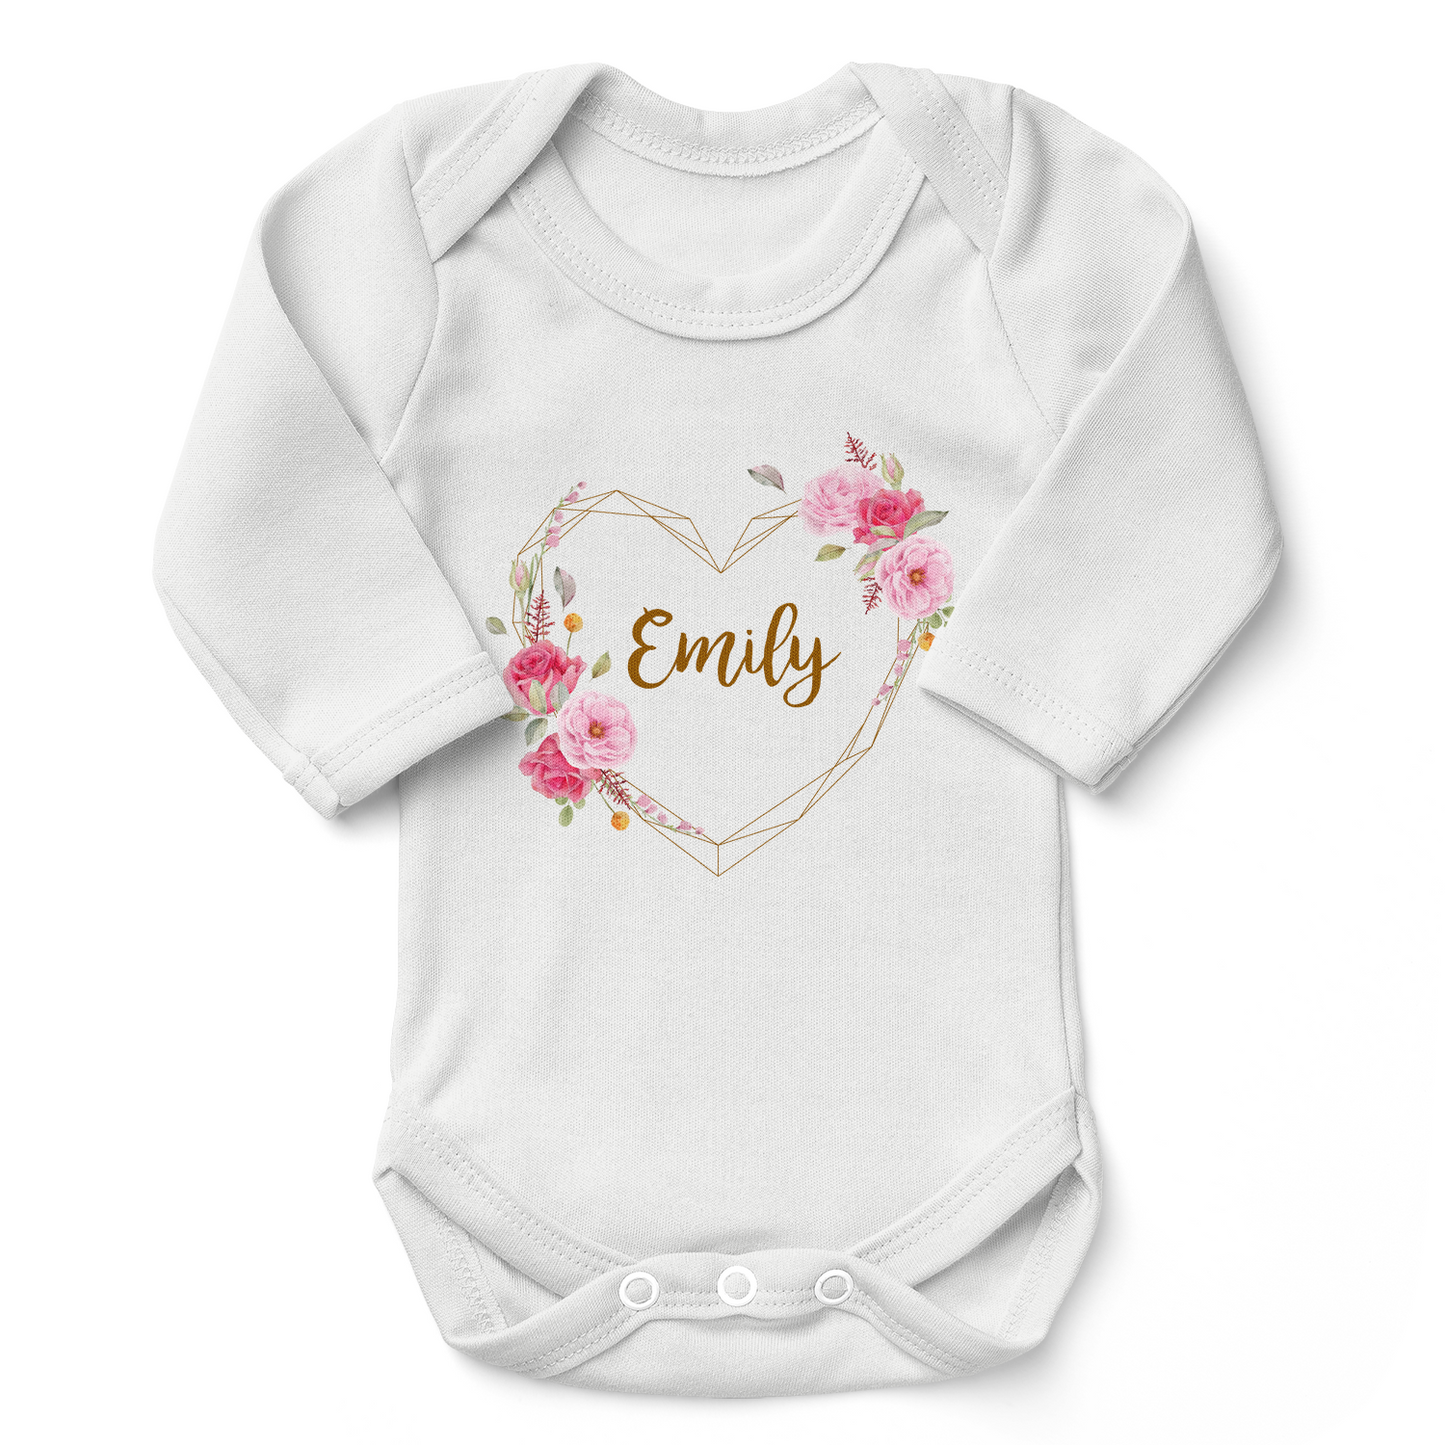 [Personalized] Endanzoo Organic Long Sleeve Baby Bodysuit - Floral Love